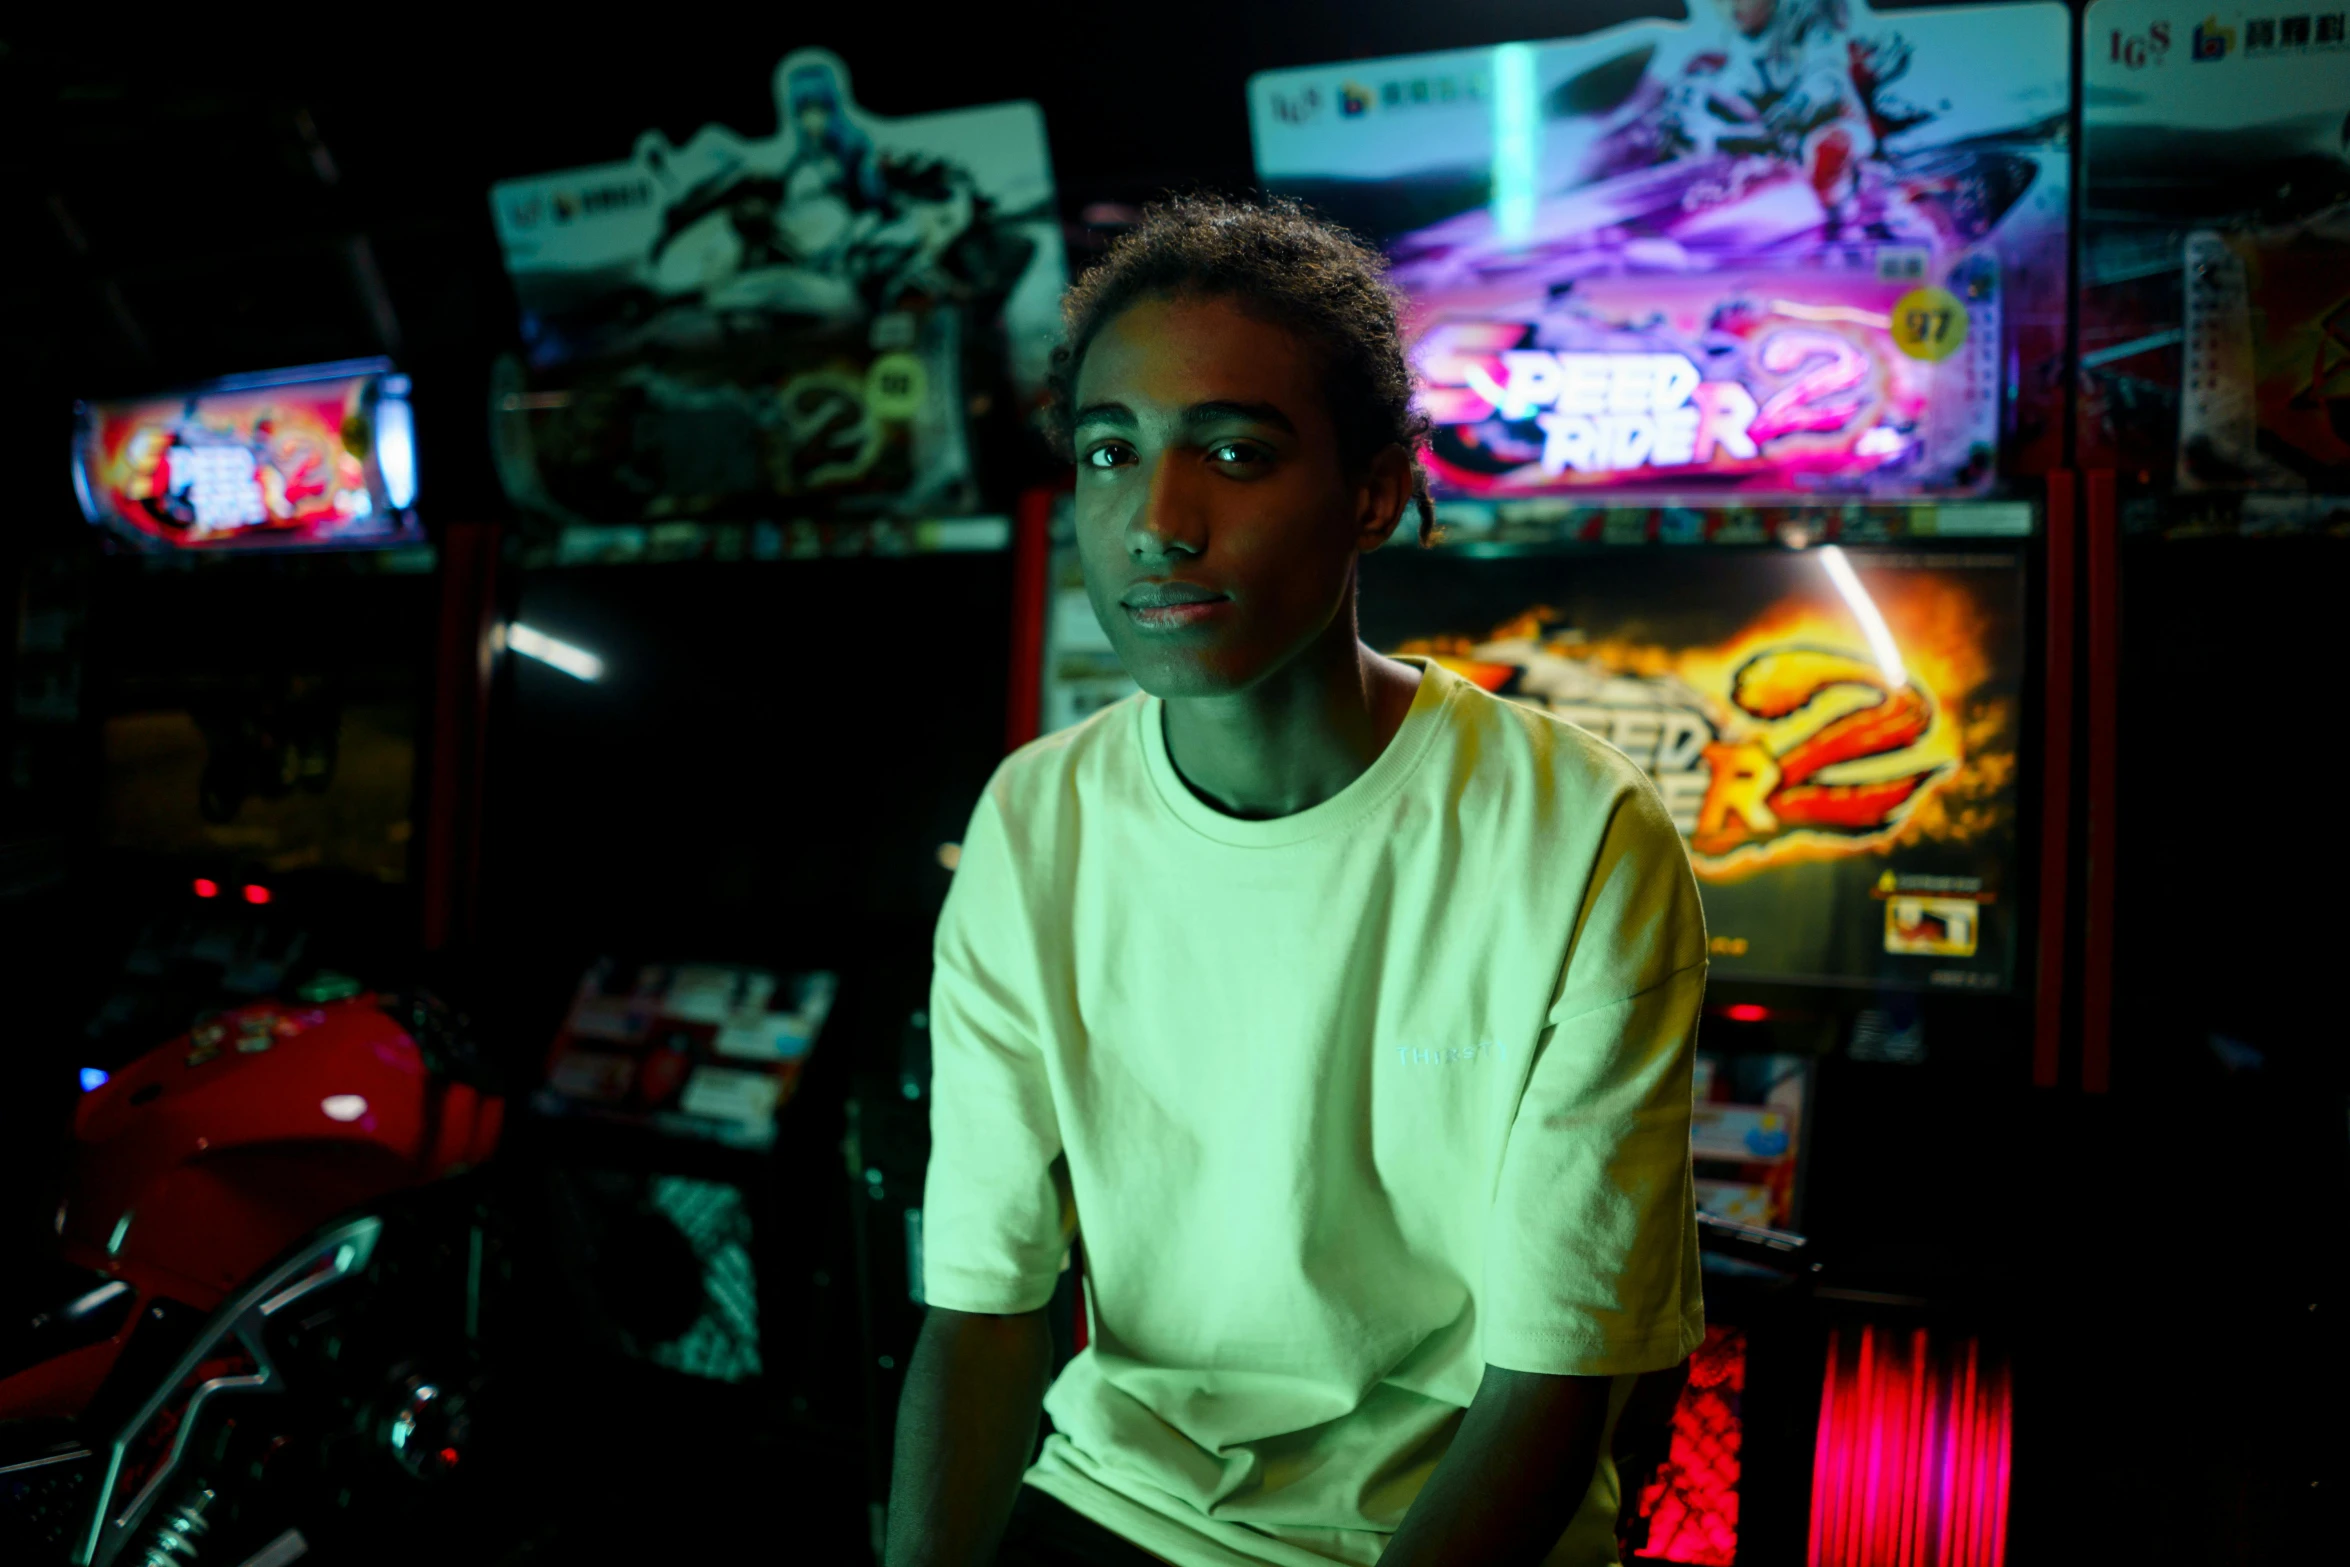 young man in white shirt looking at camera while sitting in front of neon video game machines